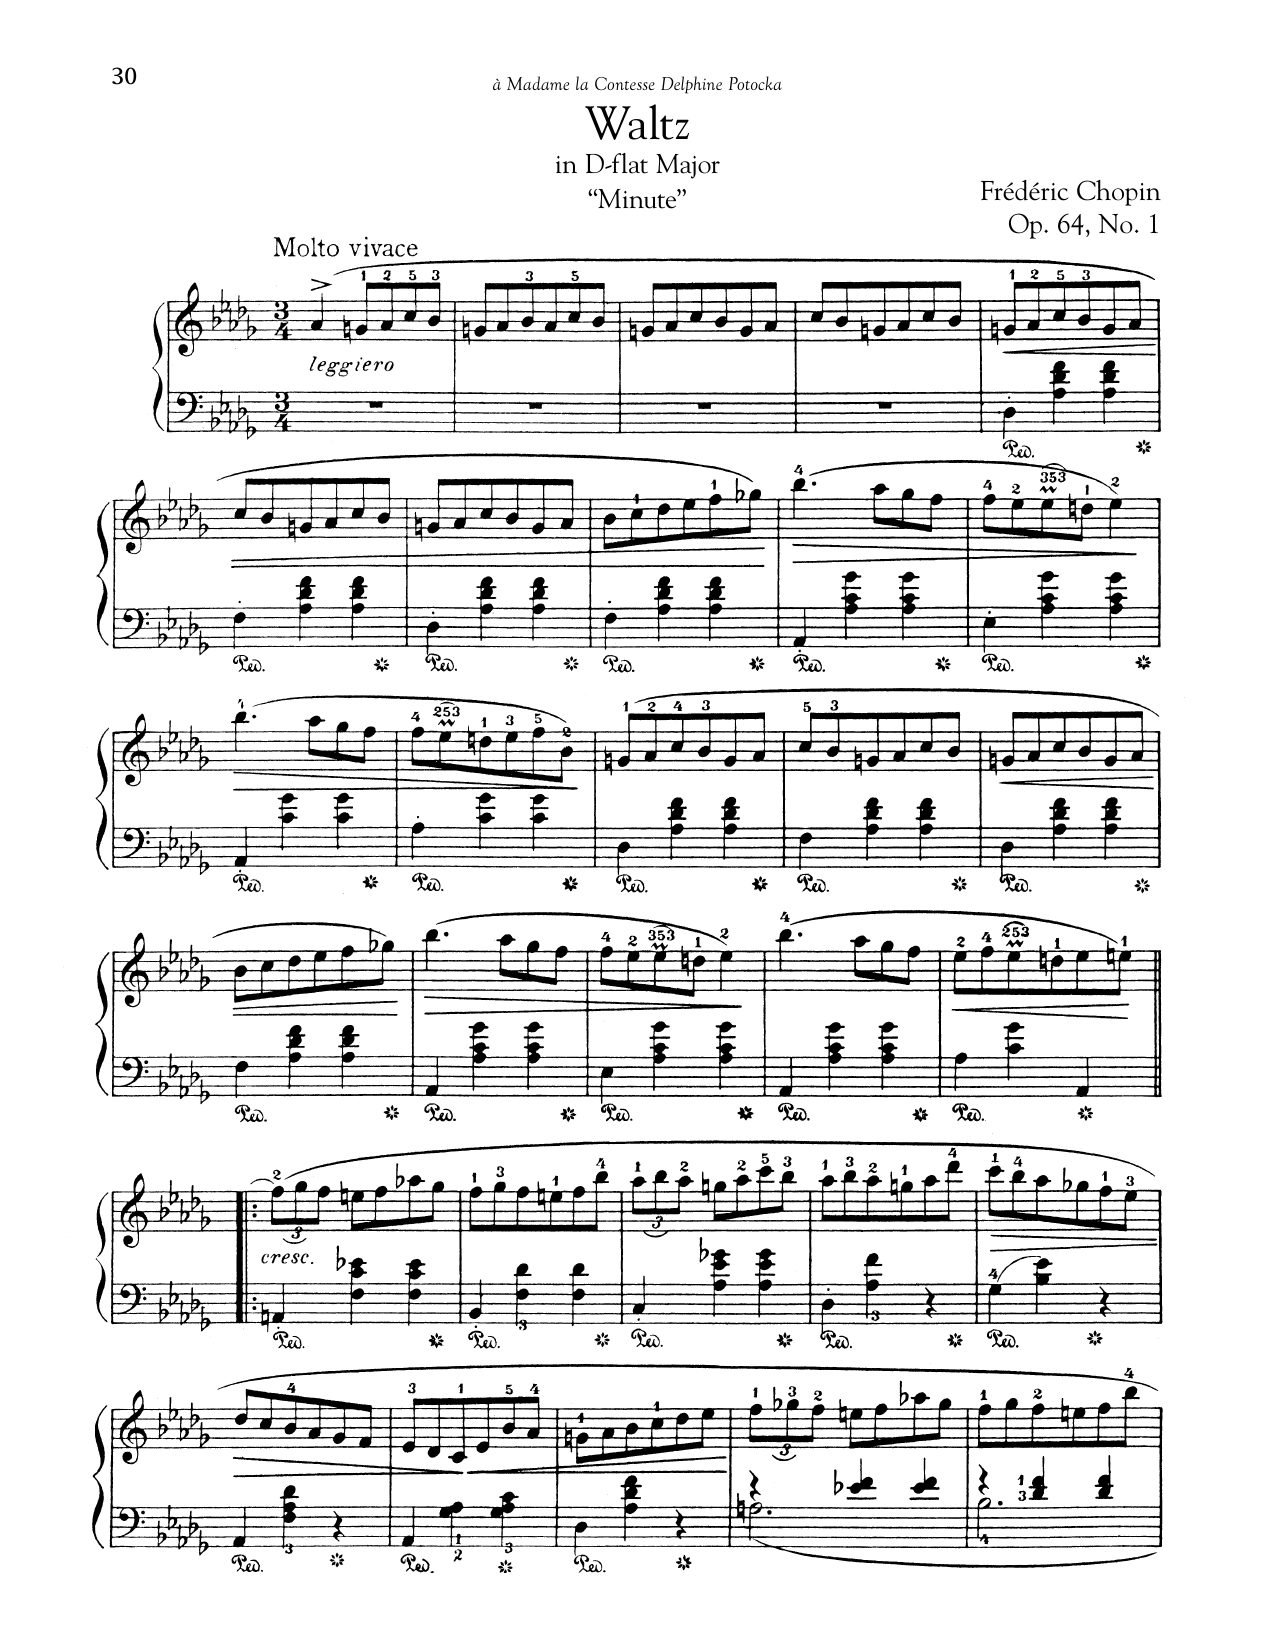 Download Frederic Chopin Waltz In D-Flat Major (